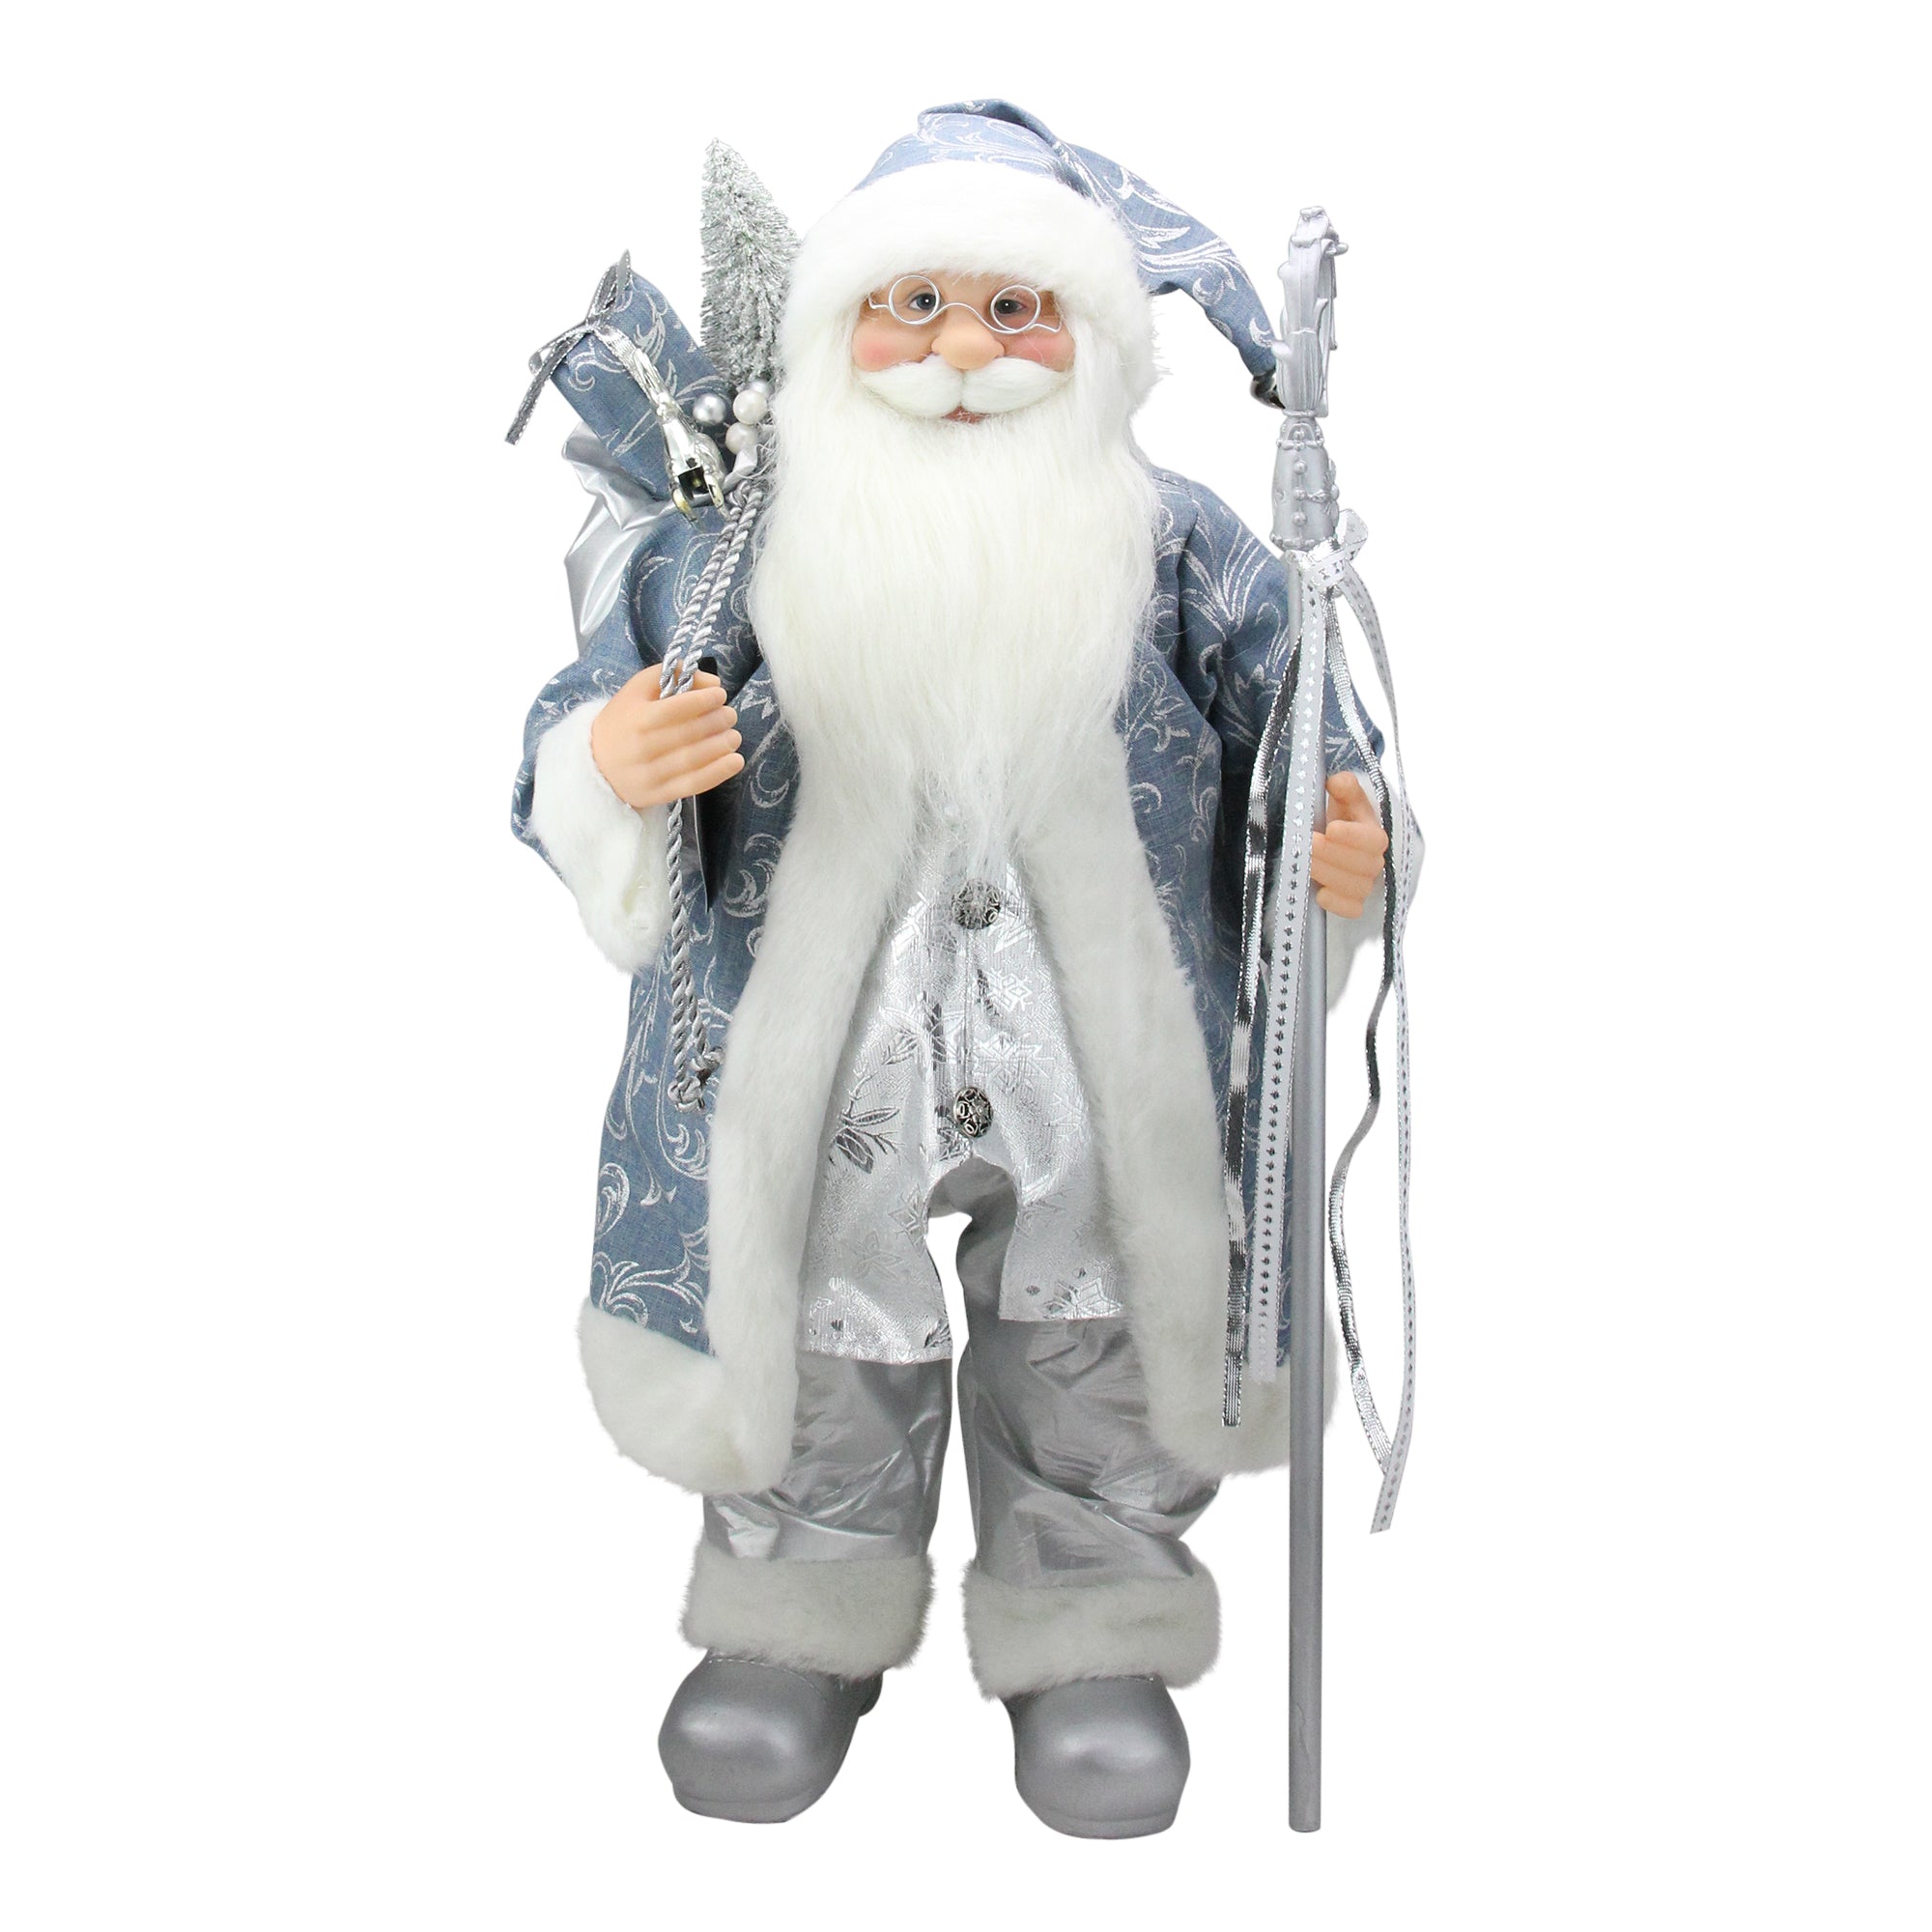 25" Ice Palace Standing Santa Claus in Blue and Silver Holding A Staff Christmas Figure